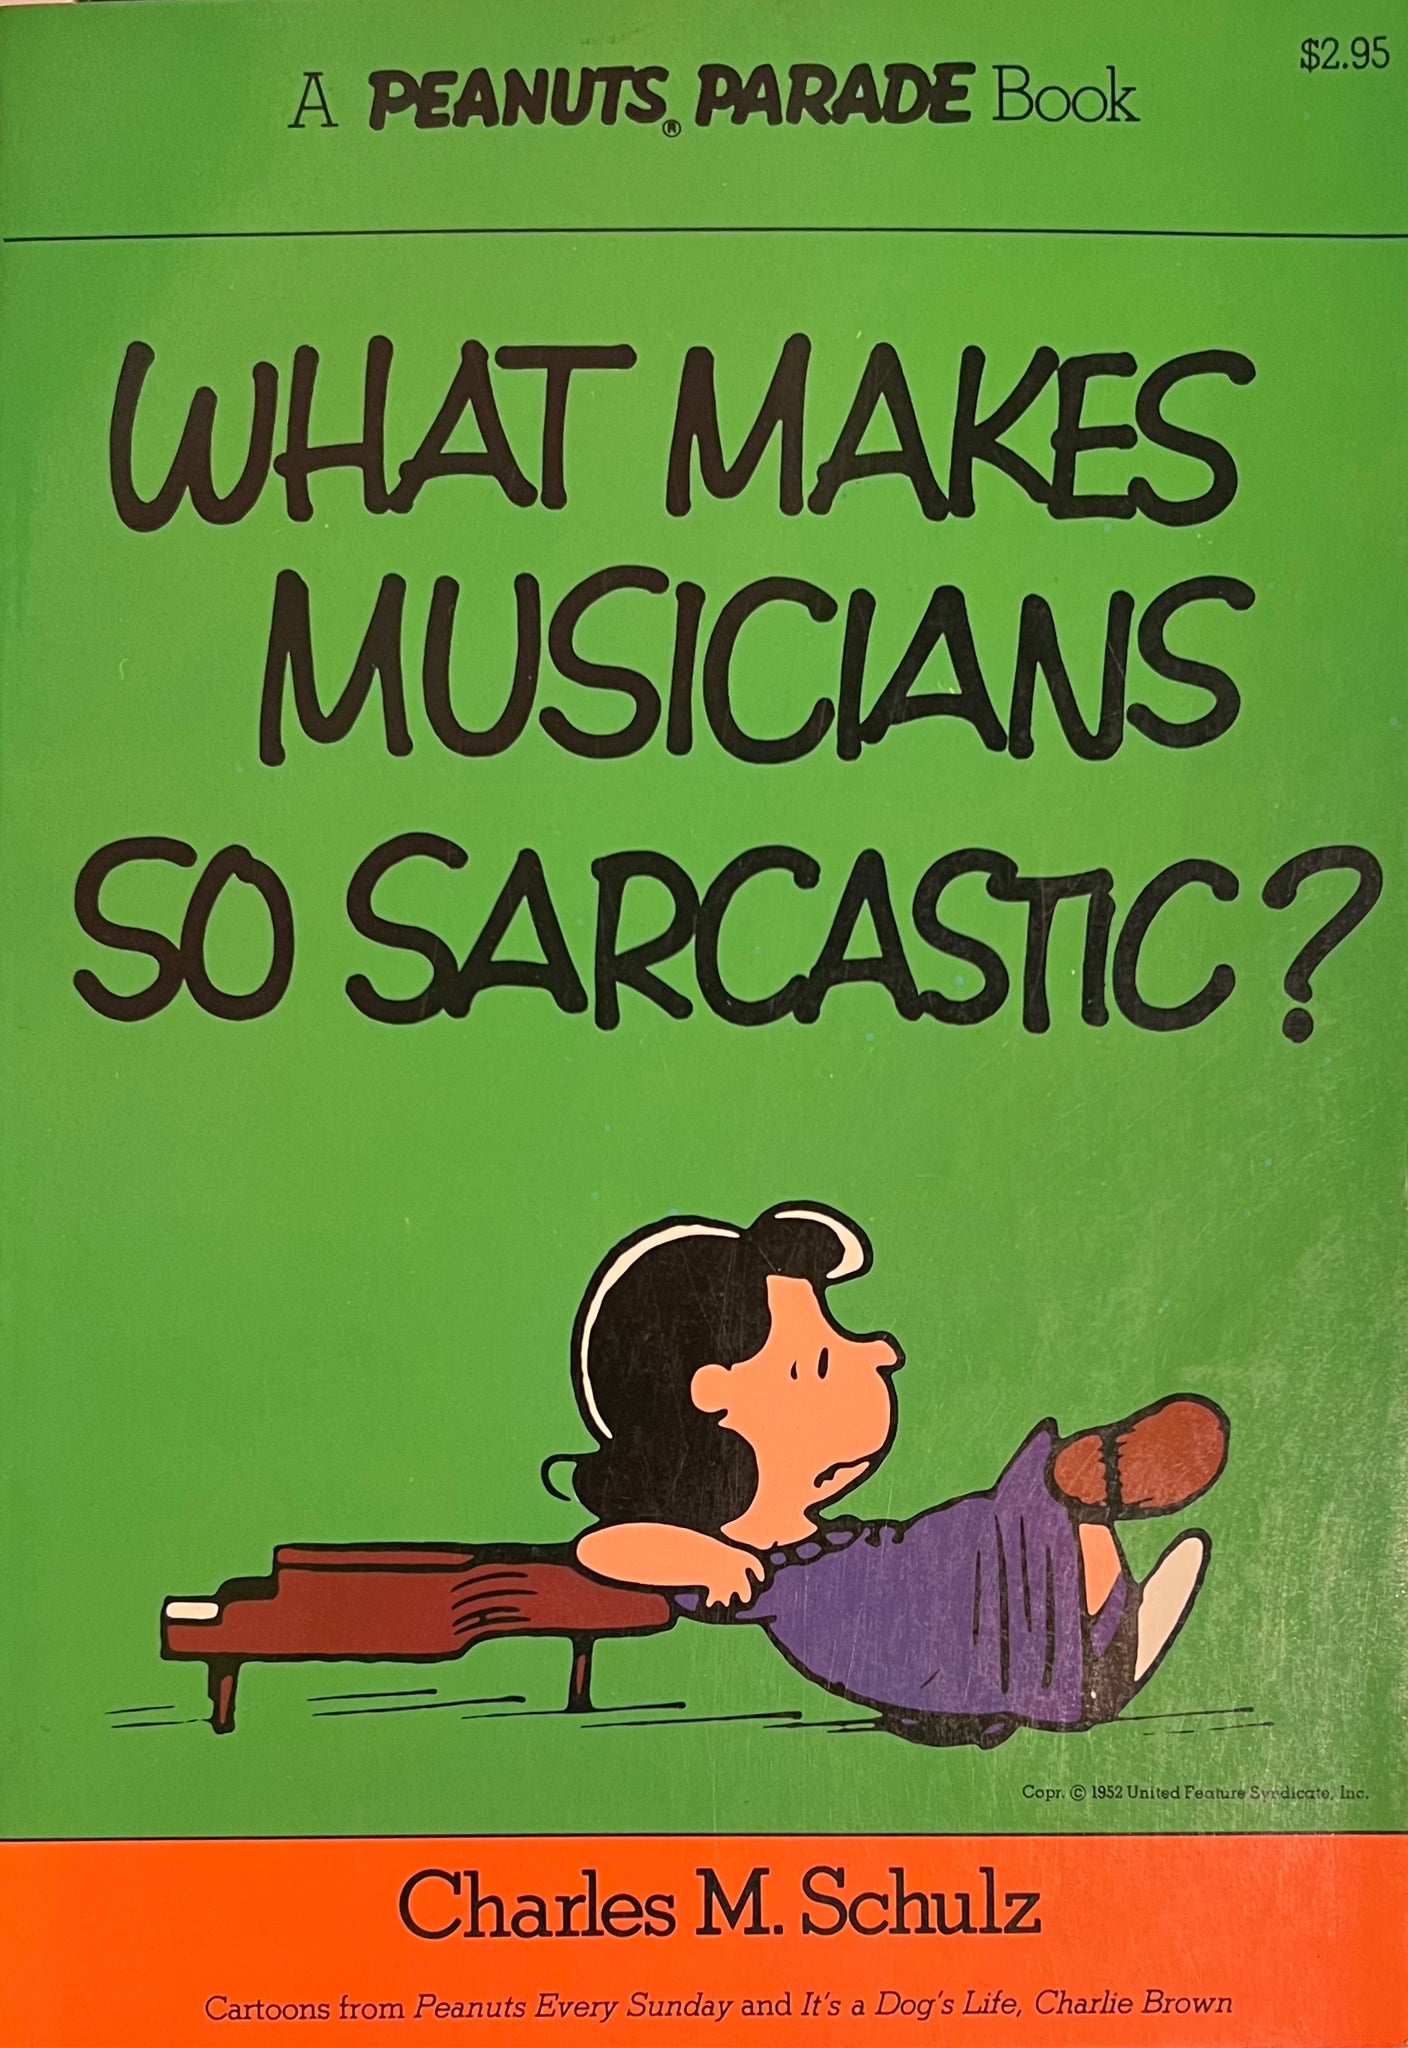 What Makes Musicians So Sarcastic? (A Peanuts Parade Book, 10), Charles M. Schulz